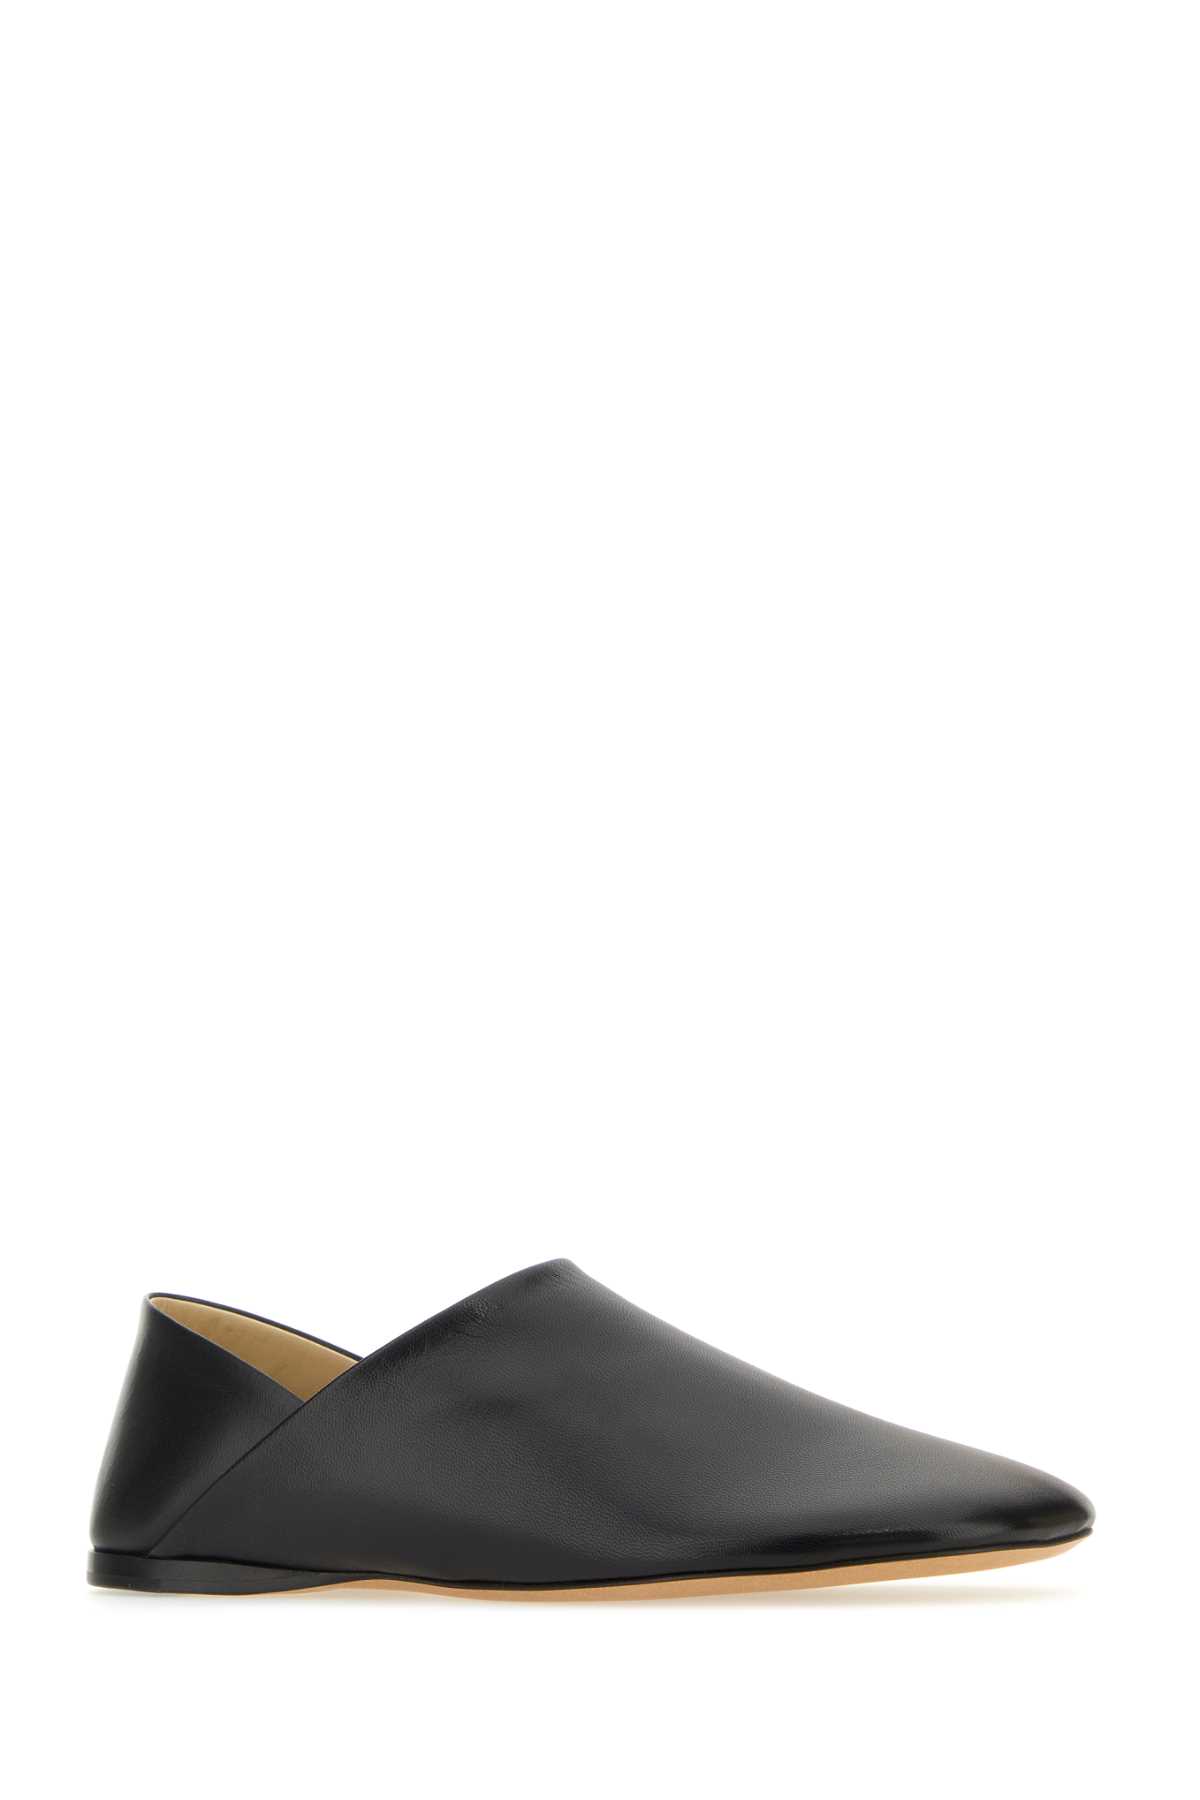 Shop Loewe Black Leather Toy Loafers